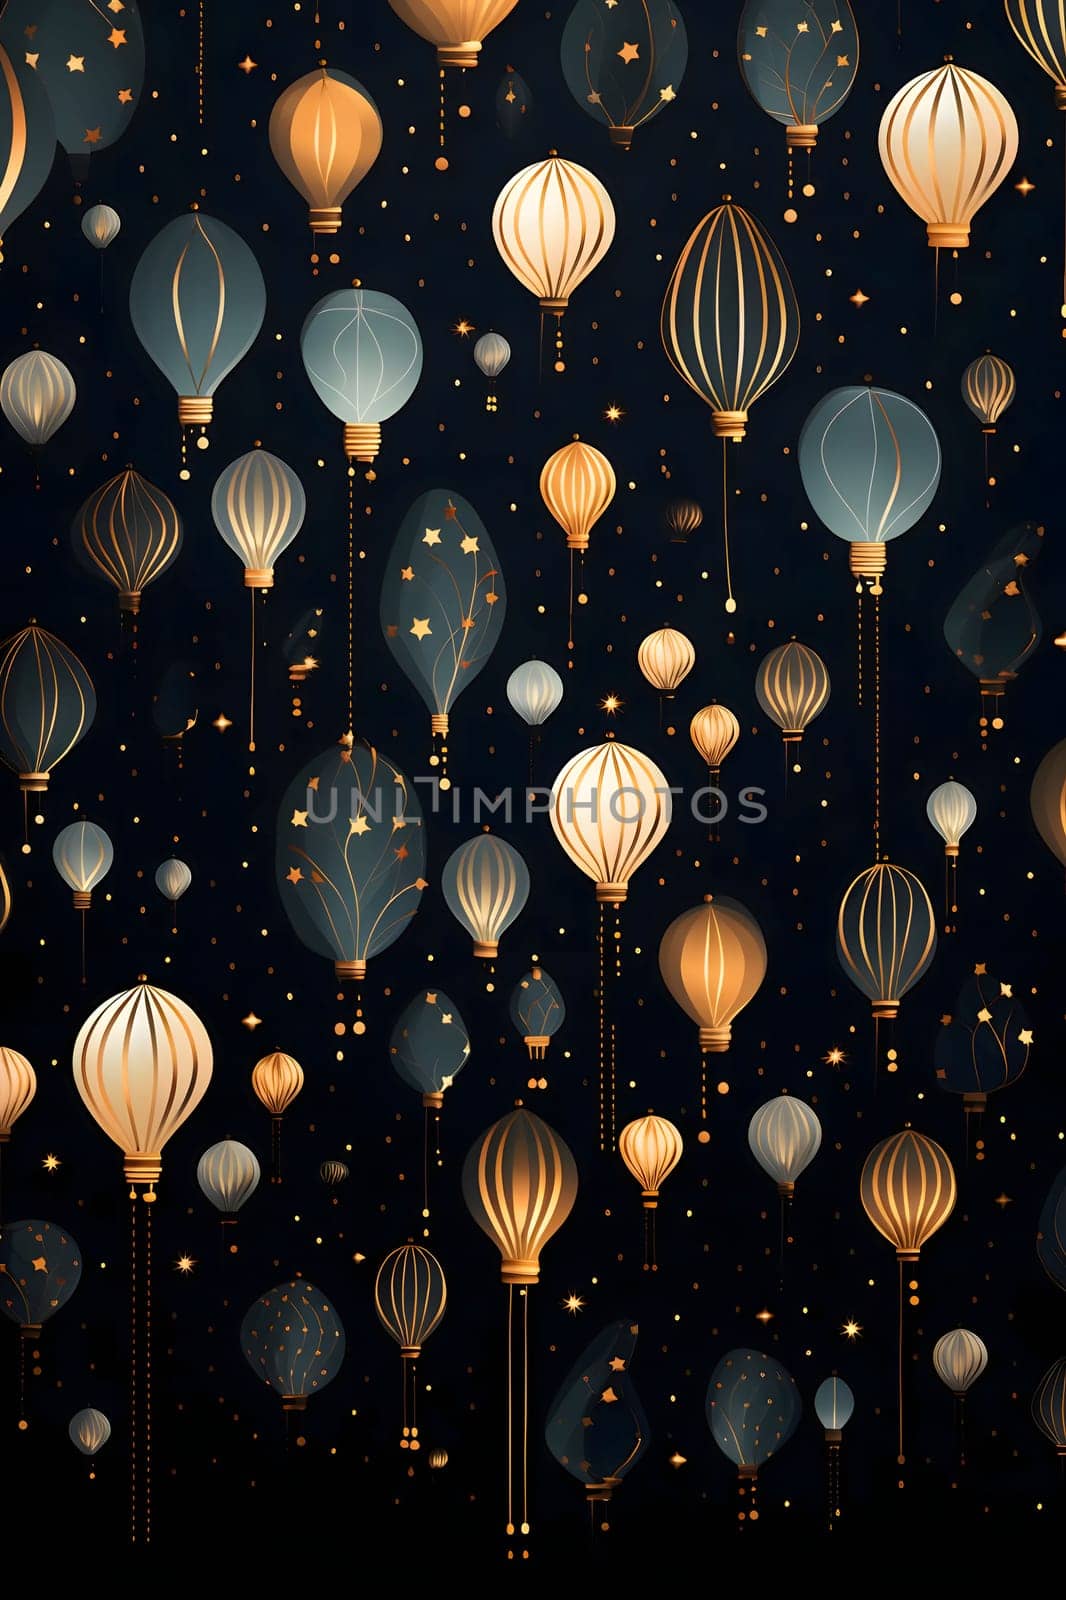 Colorful chinese lanterns as abstract background, wallpaper, banner, texture design with pattern - vector. Dark colors. by ThemesS